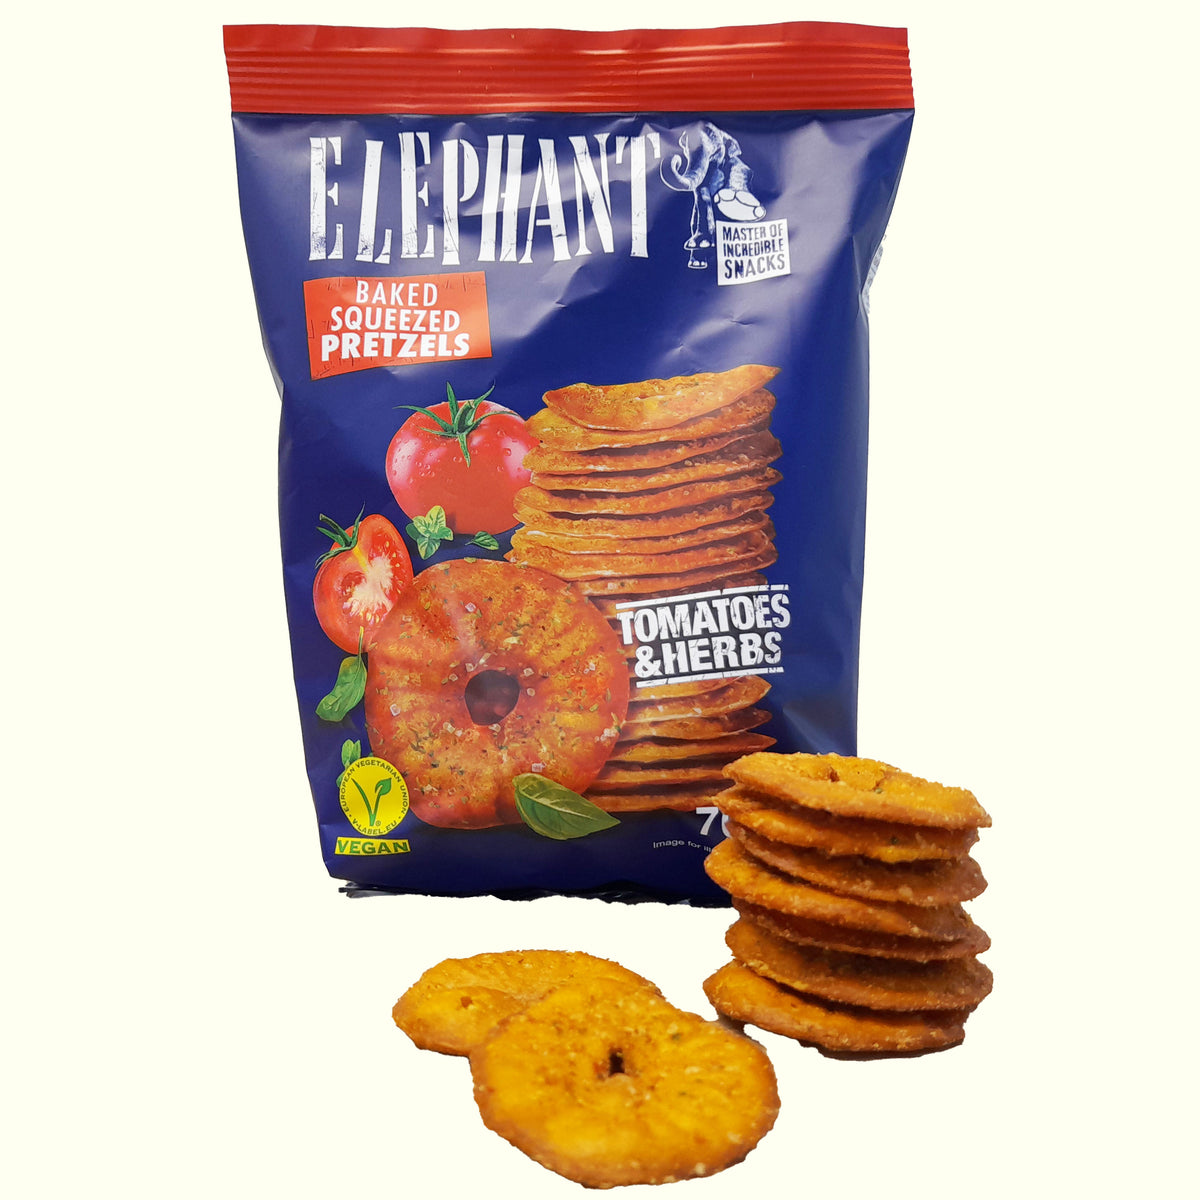 Elephant Squeezed Pretzels Tomatoes & Herbs 70g